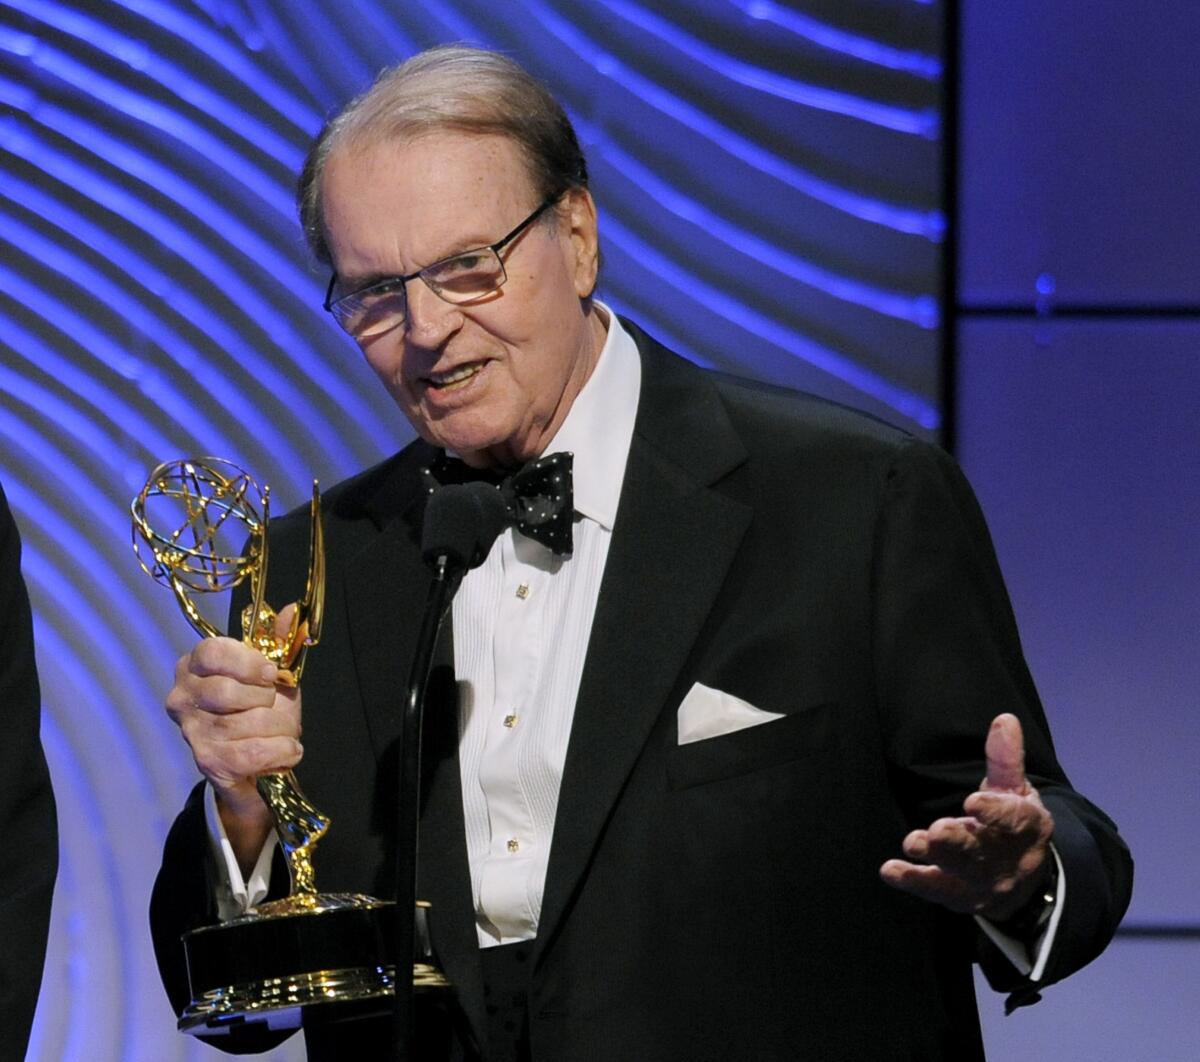 Charles Osgood accepts the award for outstanding morning program for "CBS Sunday Morning" at the 2013 Daytime Emmy Awards.